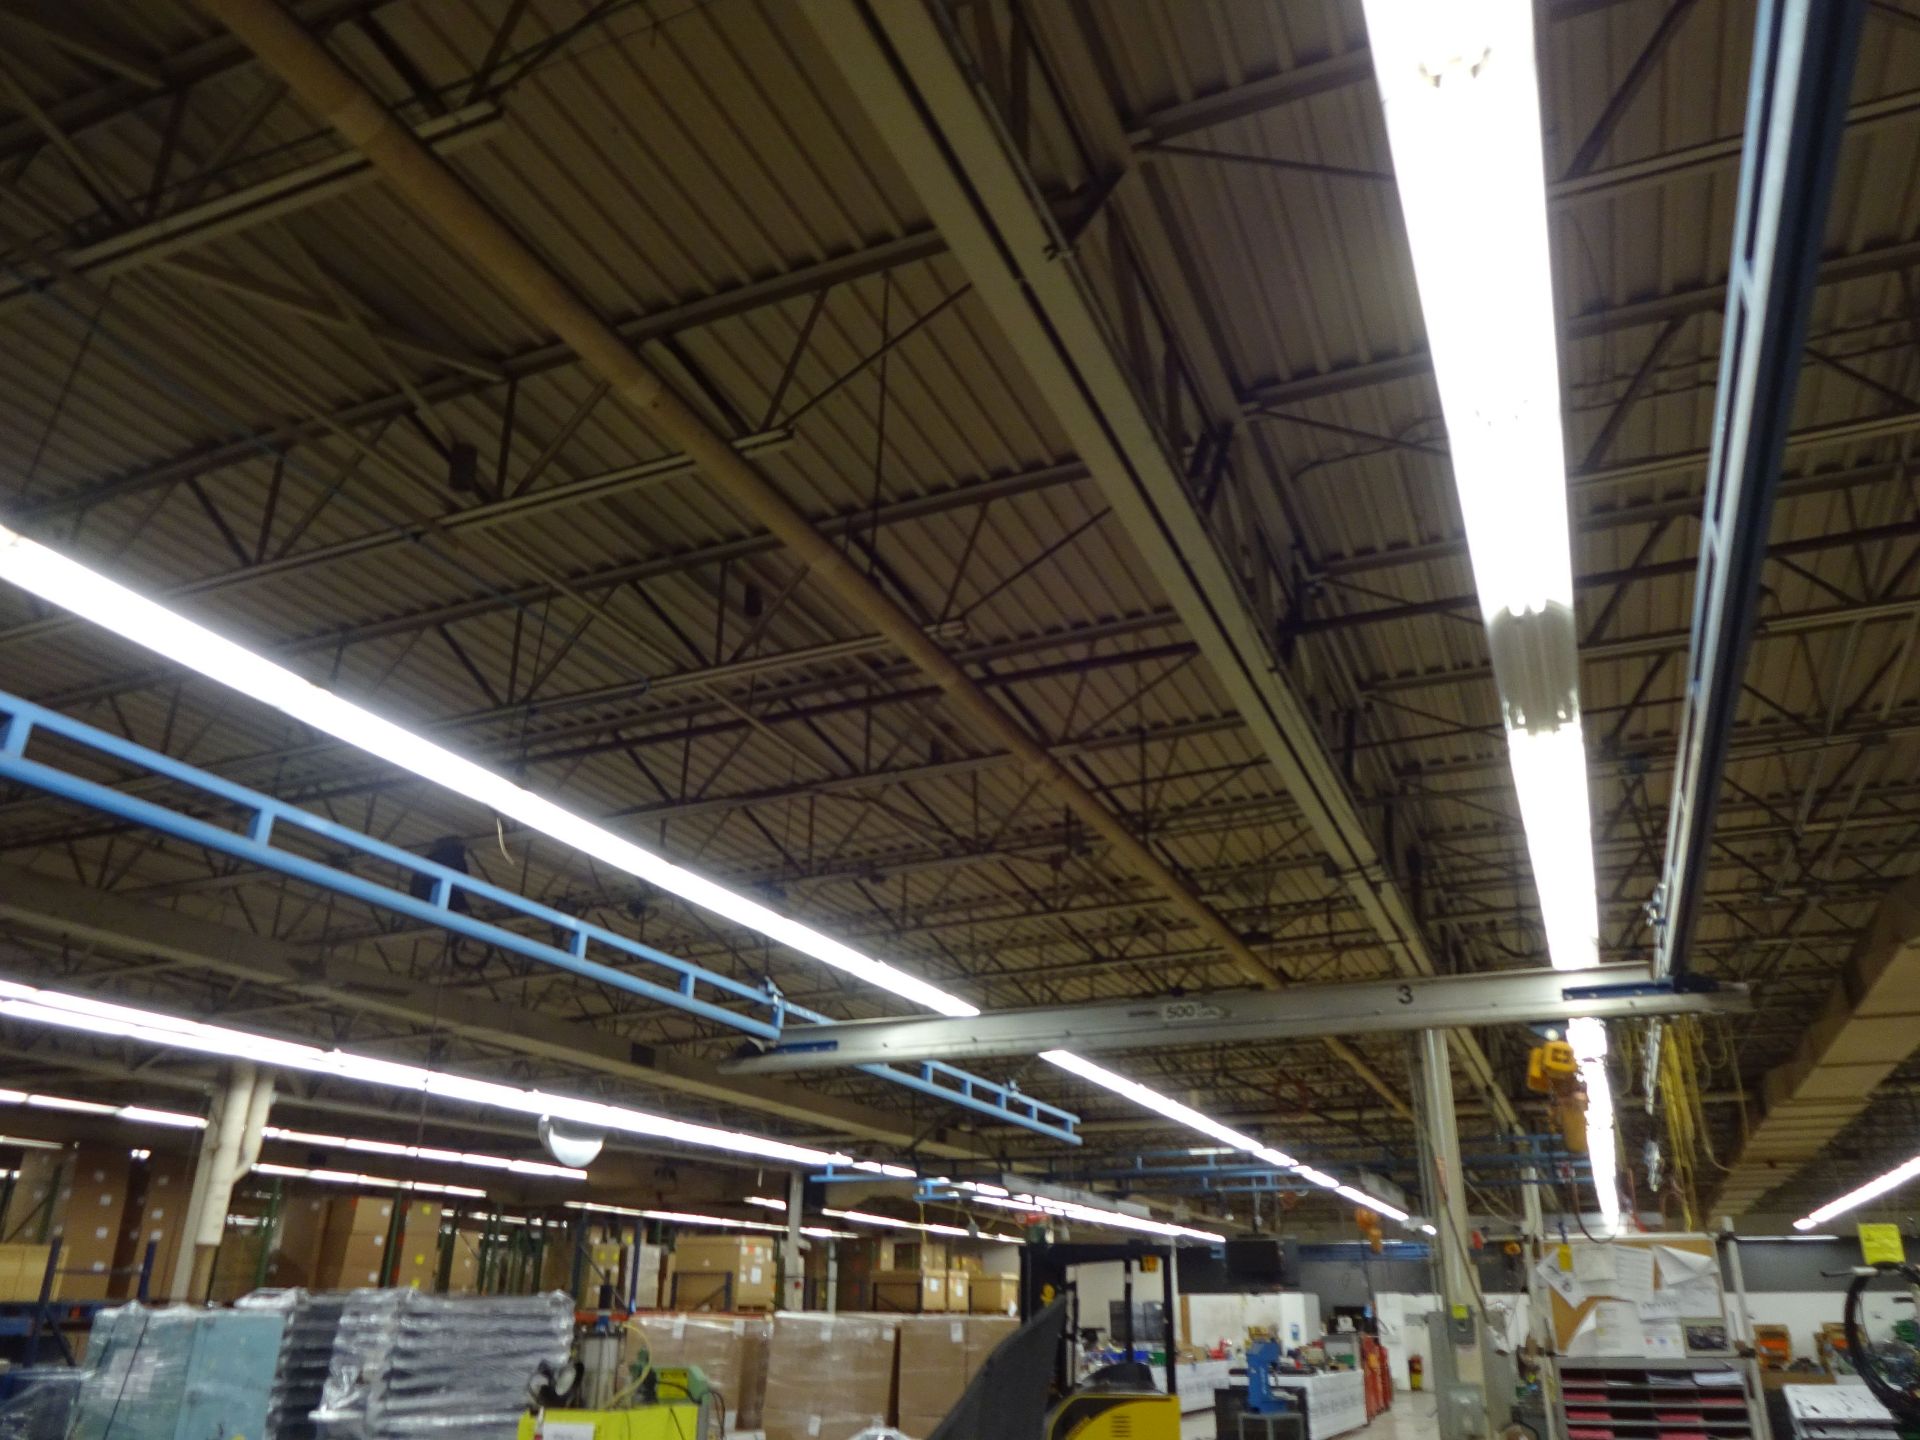 500 LB. X 40' (APPROX.) GORBEL CEILING HUNG OVERHEAD CRANE WITH 500 LB. HARRINGTON ELECTRIC CHAIN